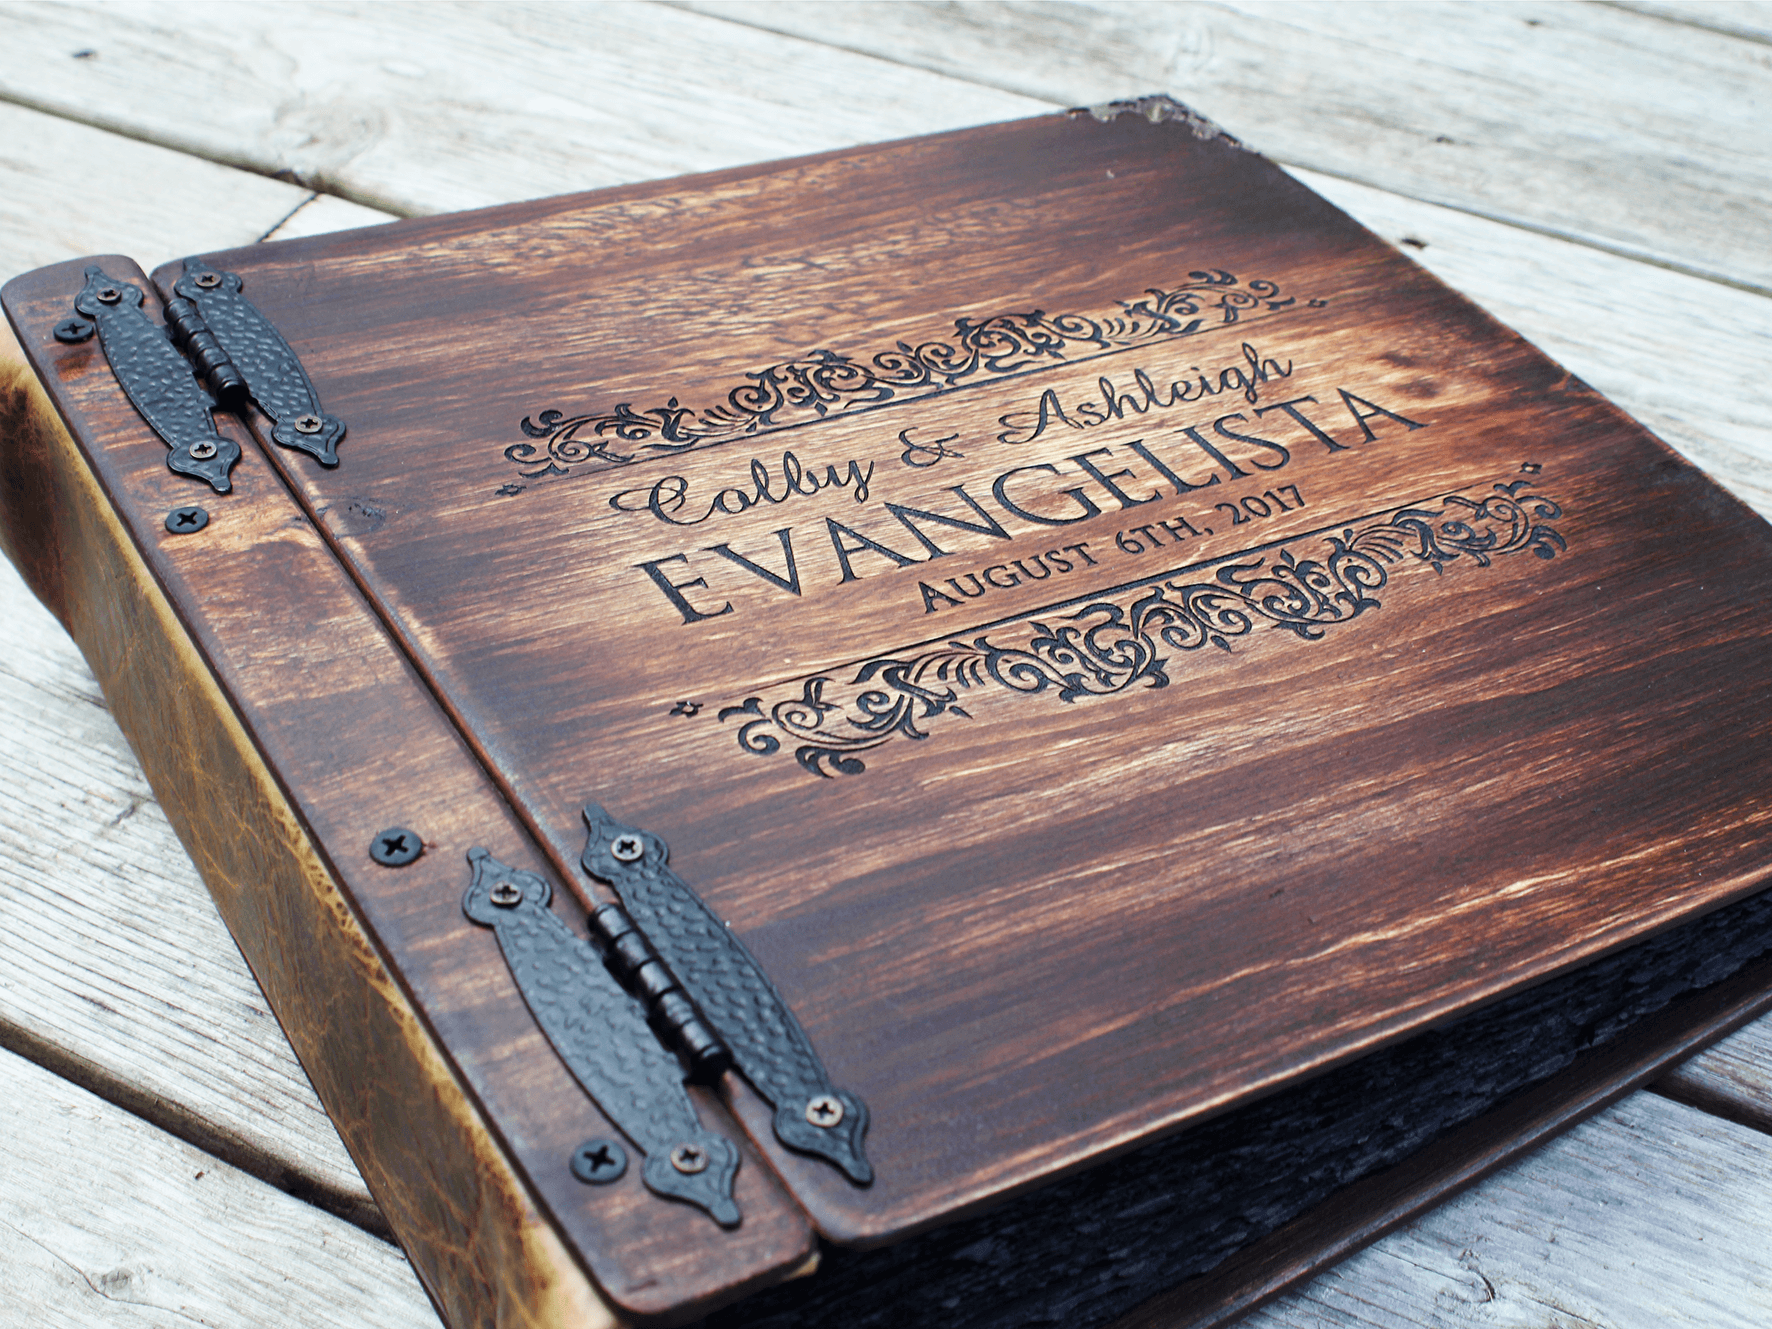 Engraved Graduation Photo Album | Showcase your graduation photos in a beautifully crafted album by Rustic Engravings - the perfect way to remember your special day.